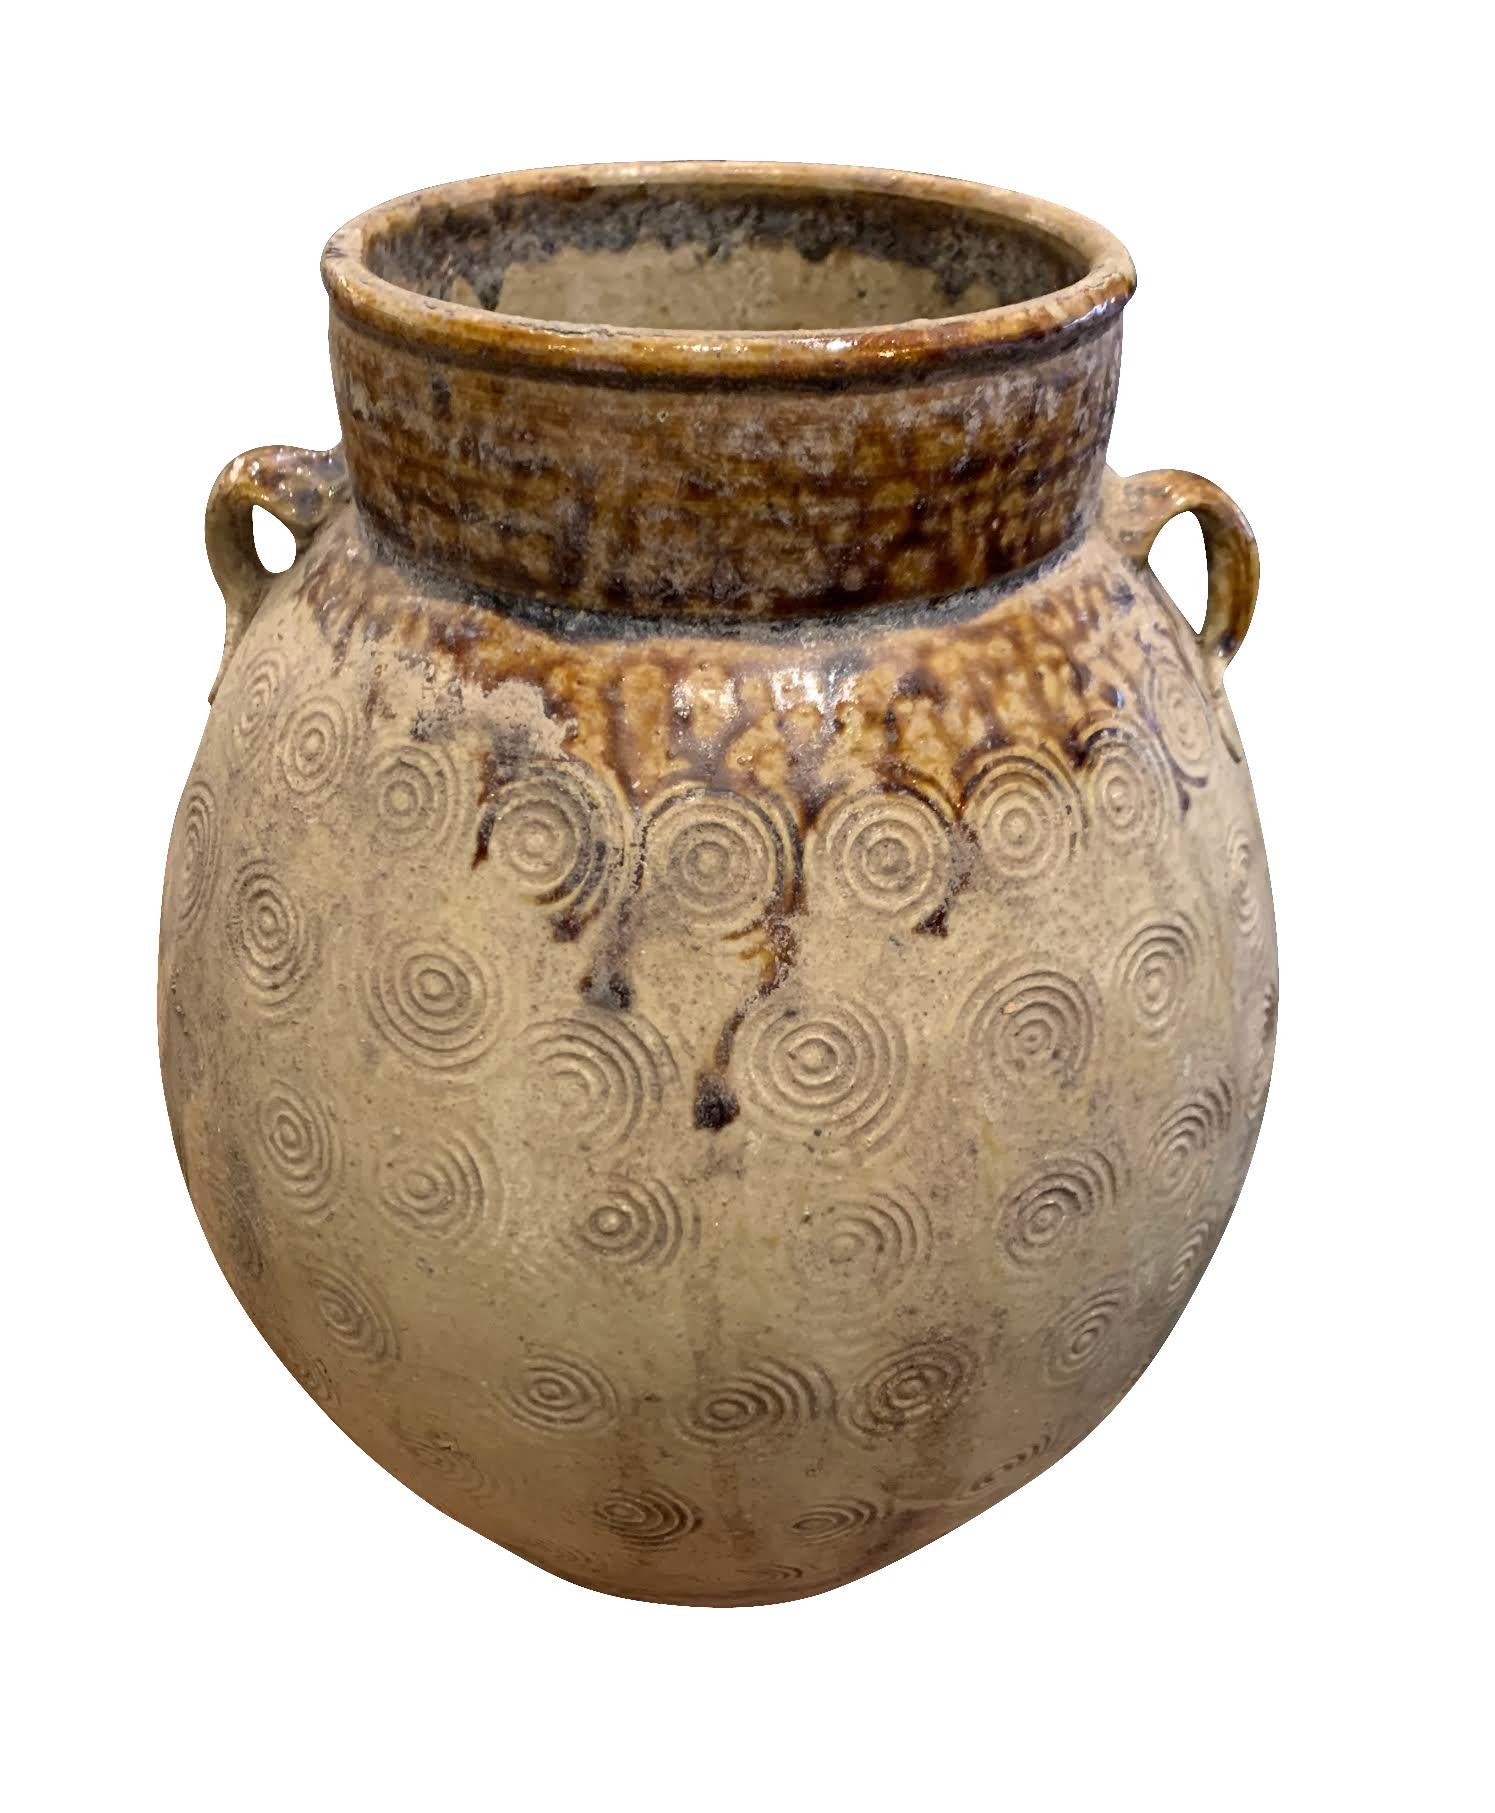 Brown Patterned Ceramic Vase, China, 19th Century For Sale 2